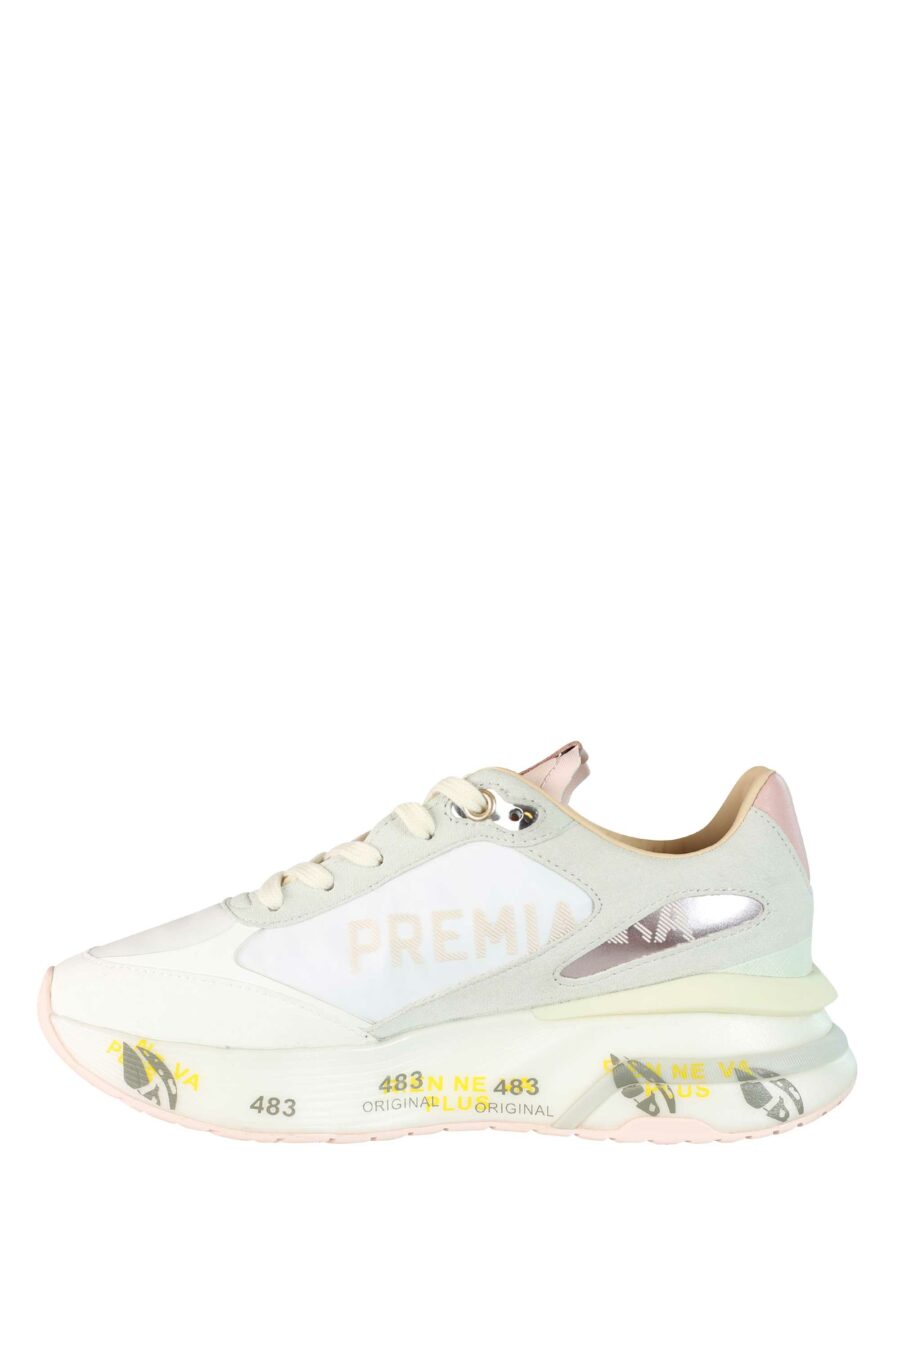 White trainers with pink and grey "moe run-d 6338" - 8058326253473 3